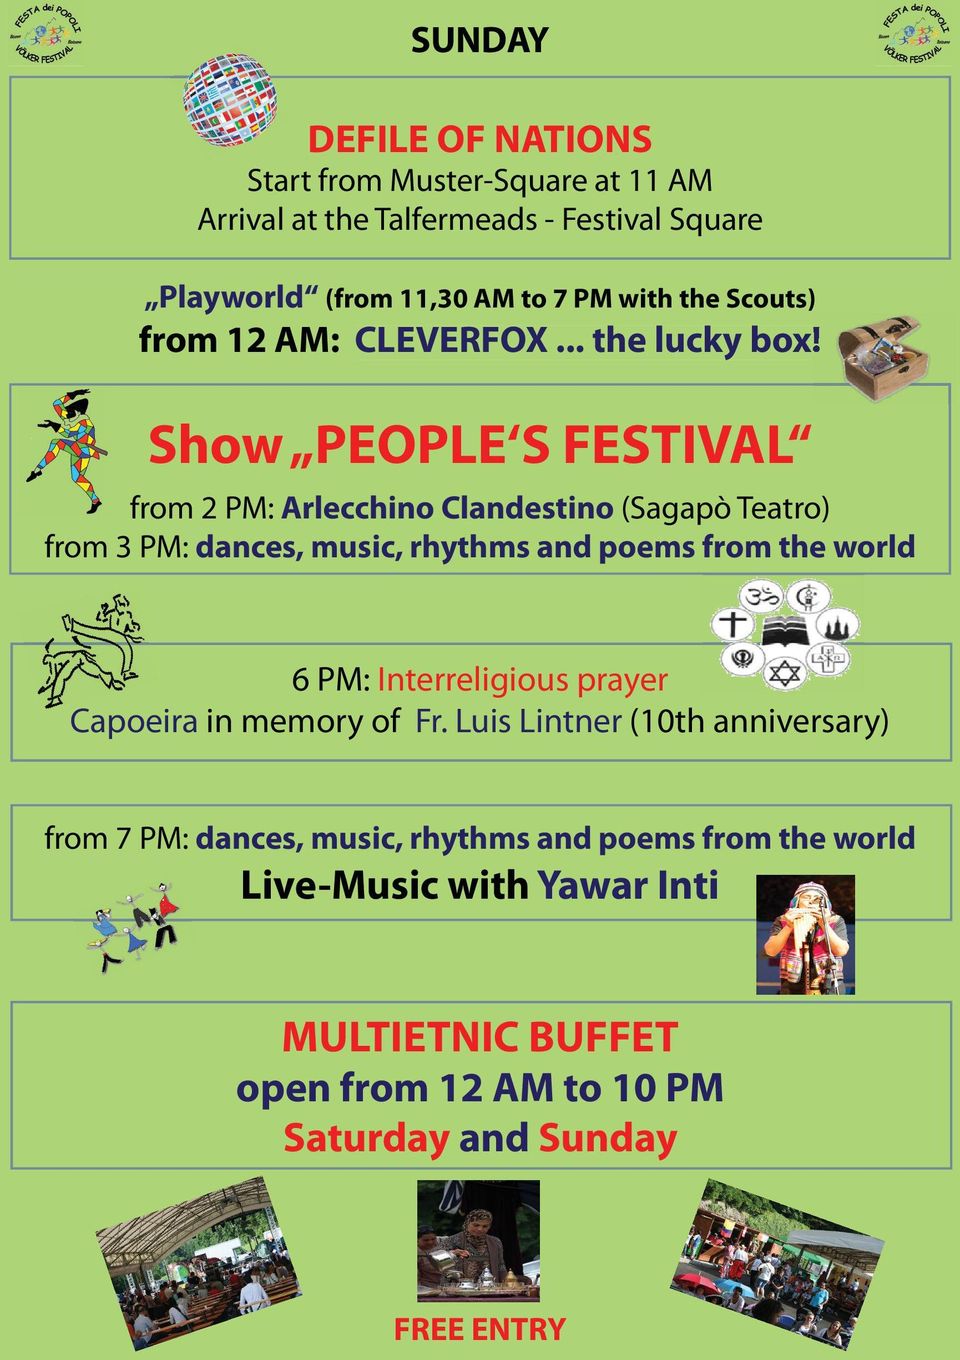 Show PEOPLE S FESTIVAL from 2 PM: Arlecchino Clandestino (Sagapò Teatro) from 3 PM: dances, music, rhythms and poems from the world 6 PM: